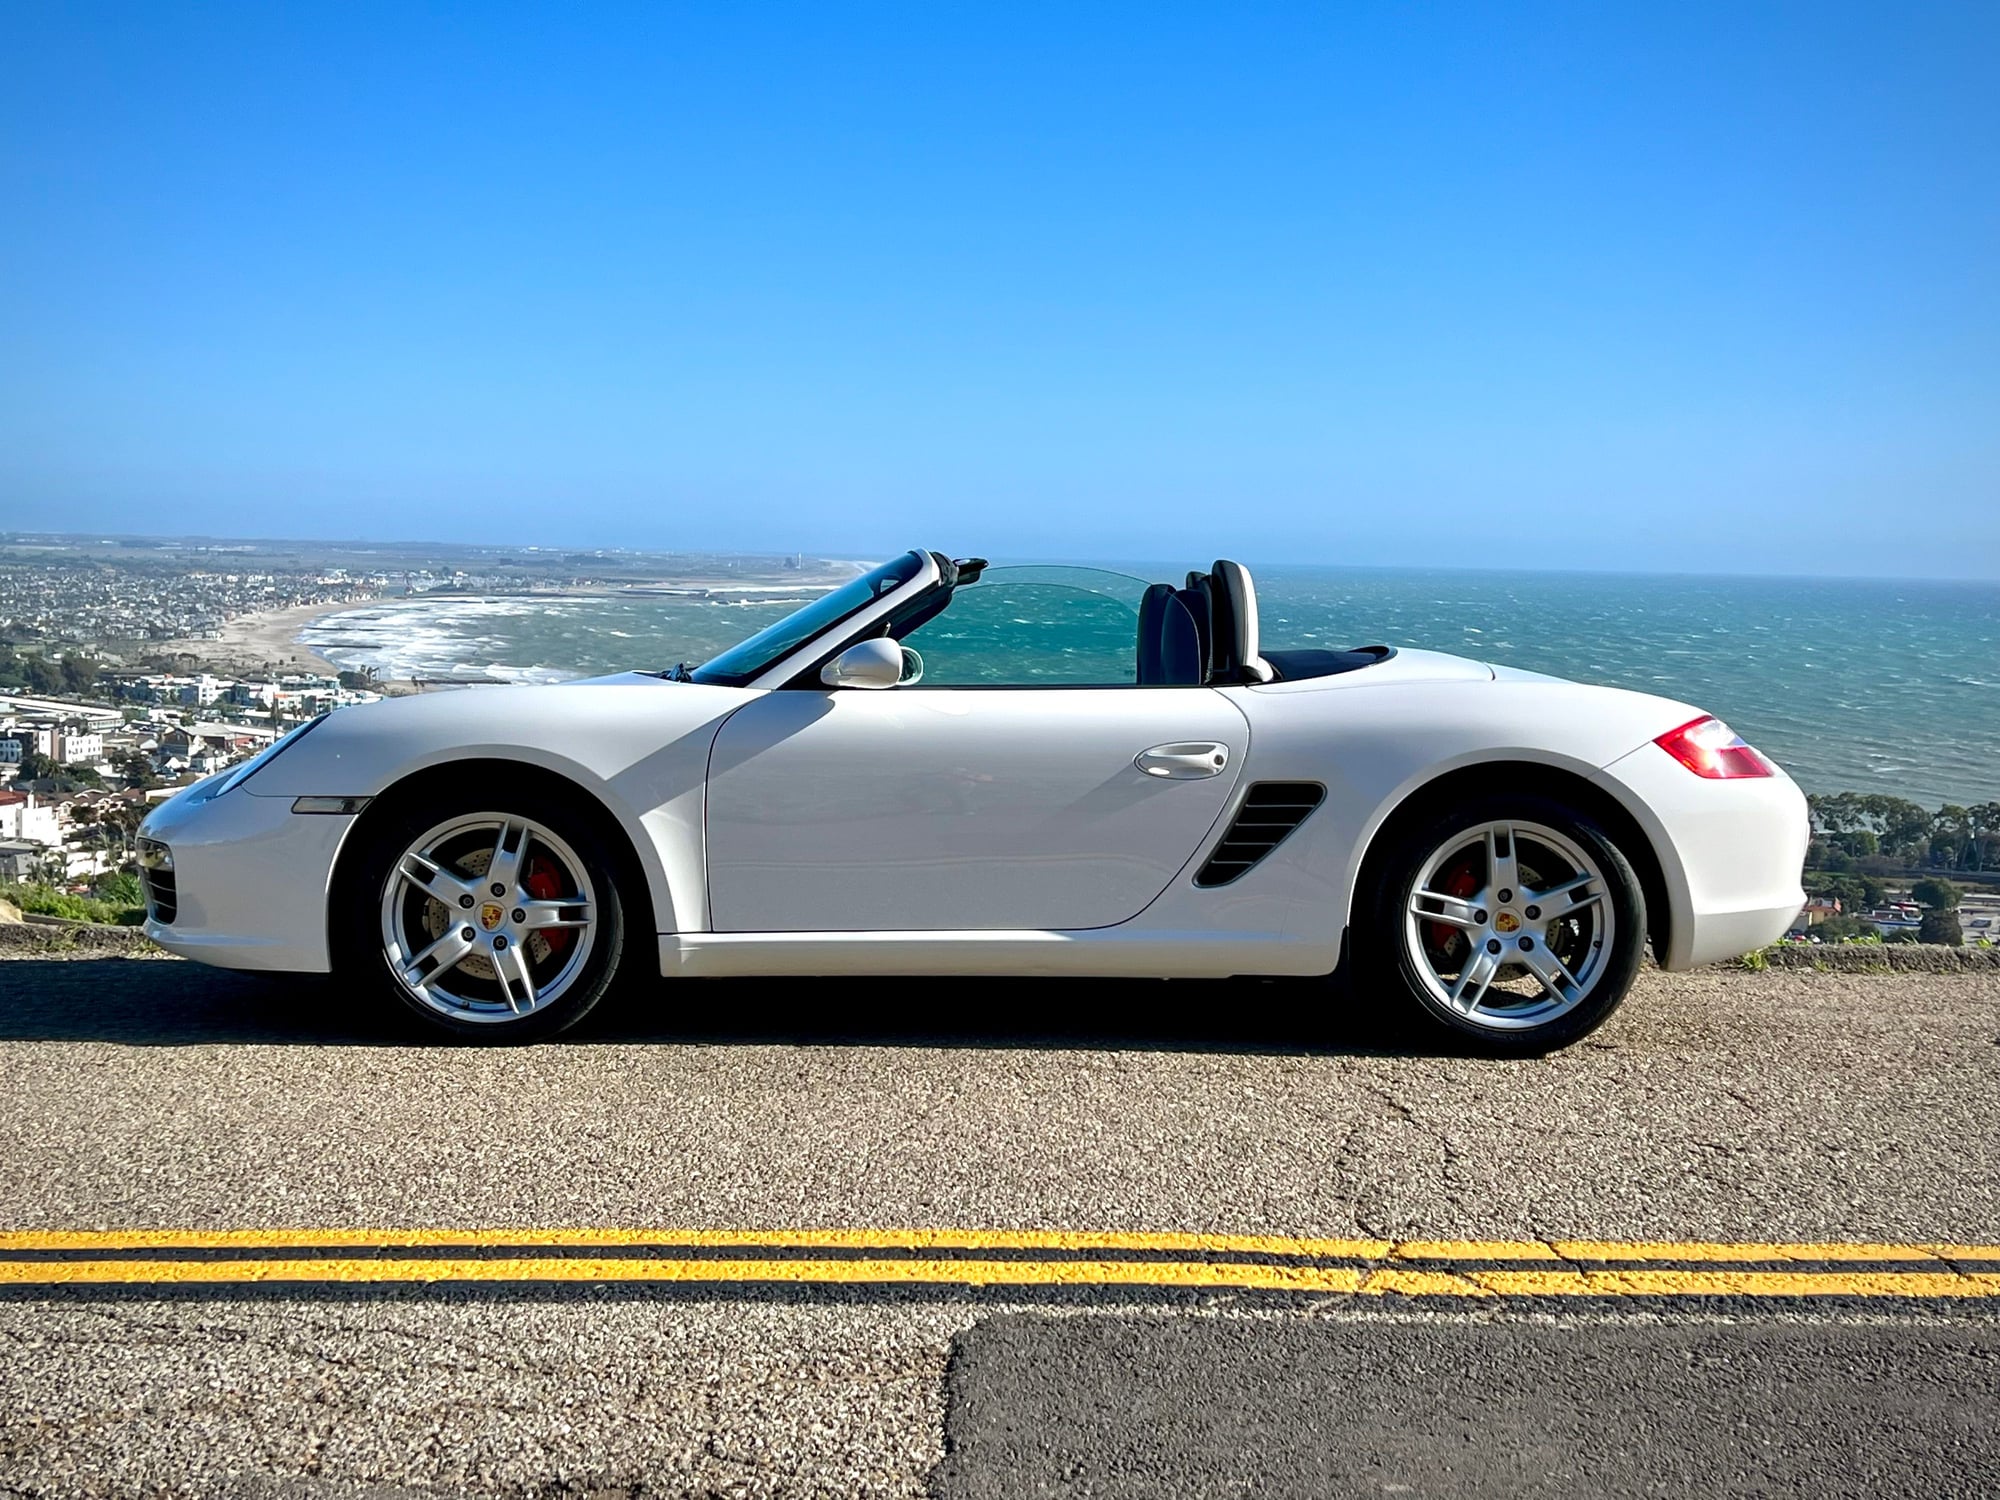 2005 Porsche Boxster - Family Owned 2005 Boxster S - Used - VIN WP0CB29825U732111 - 30,000 Miles - 6 cyl - 2WD - Manual - Convertible - White - Ventura, CA 93003, United States